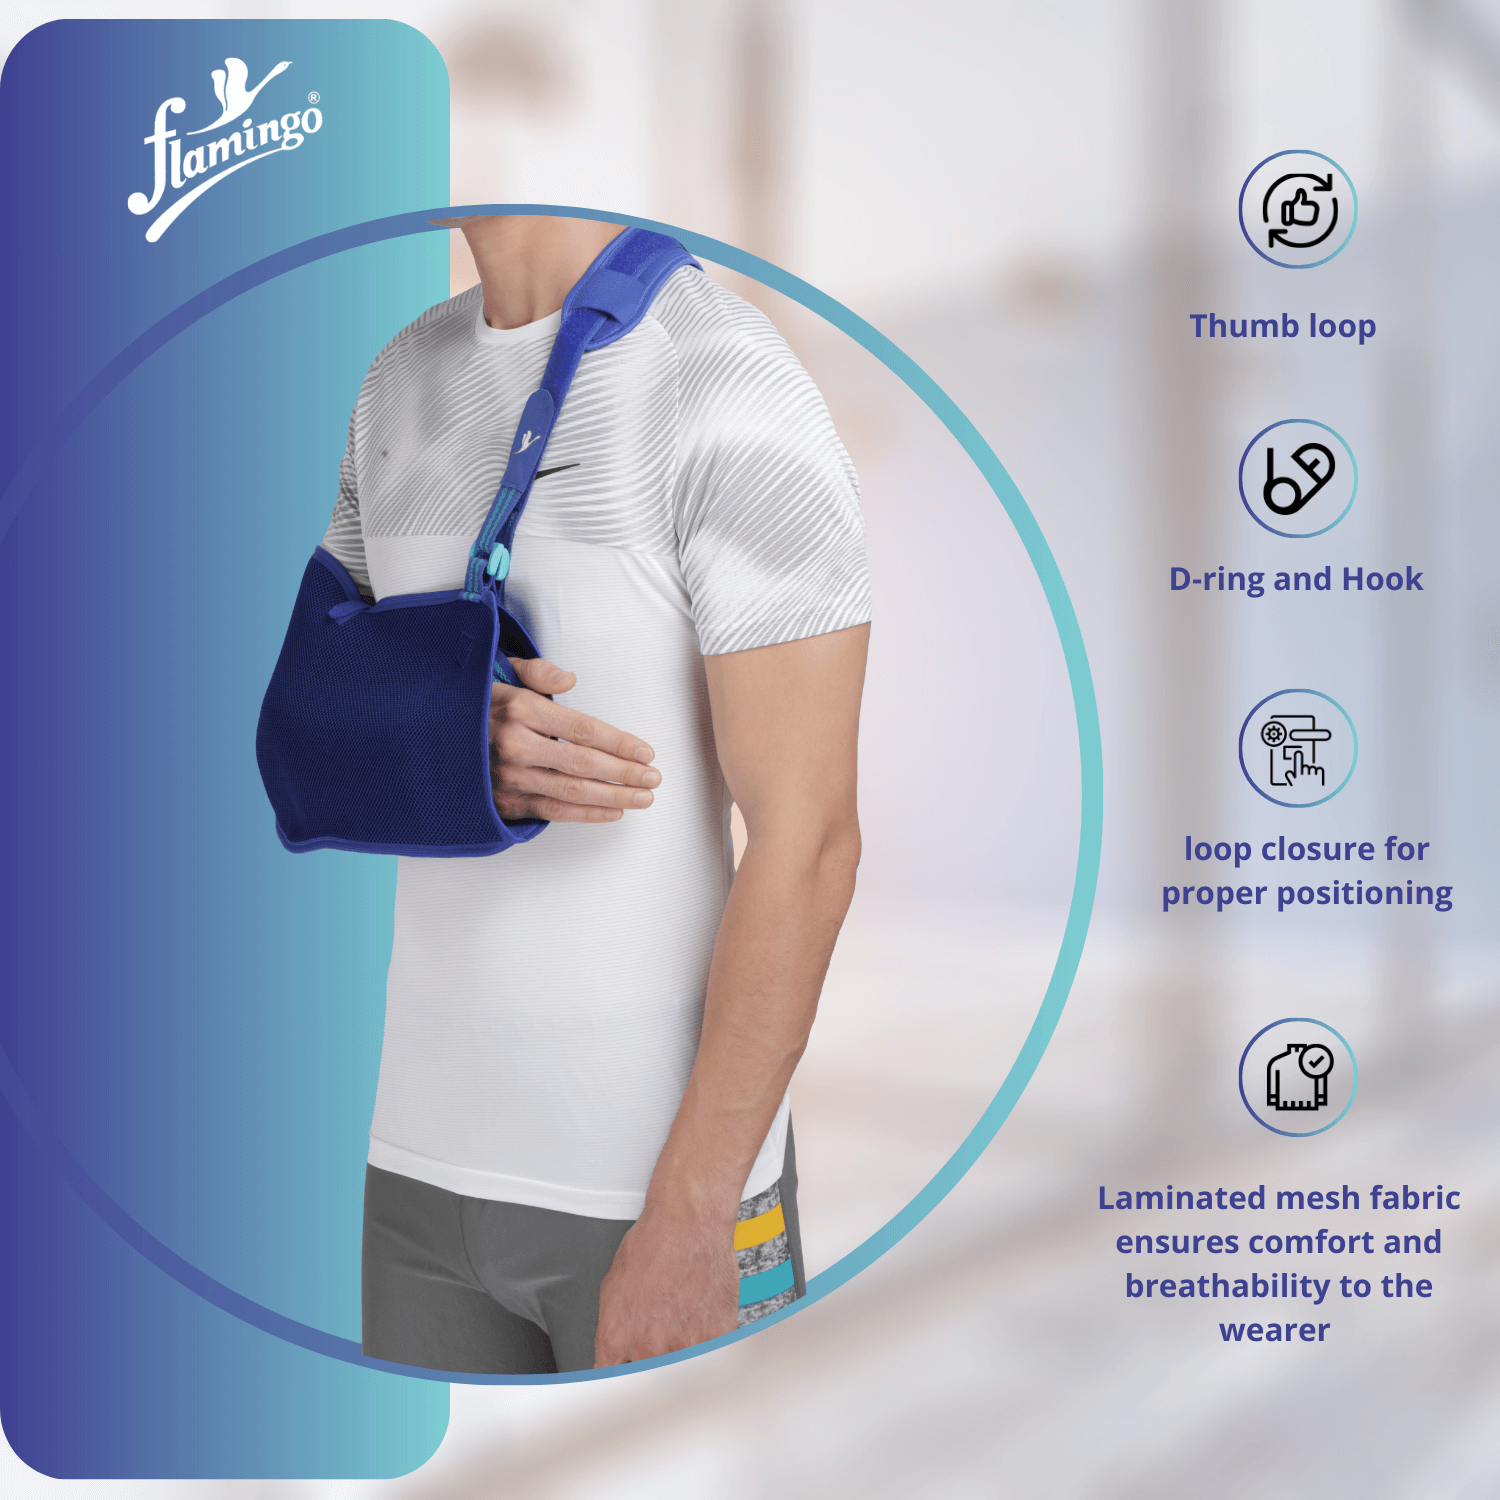 Breathable Arm Sling